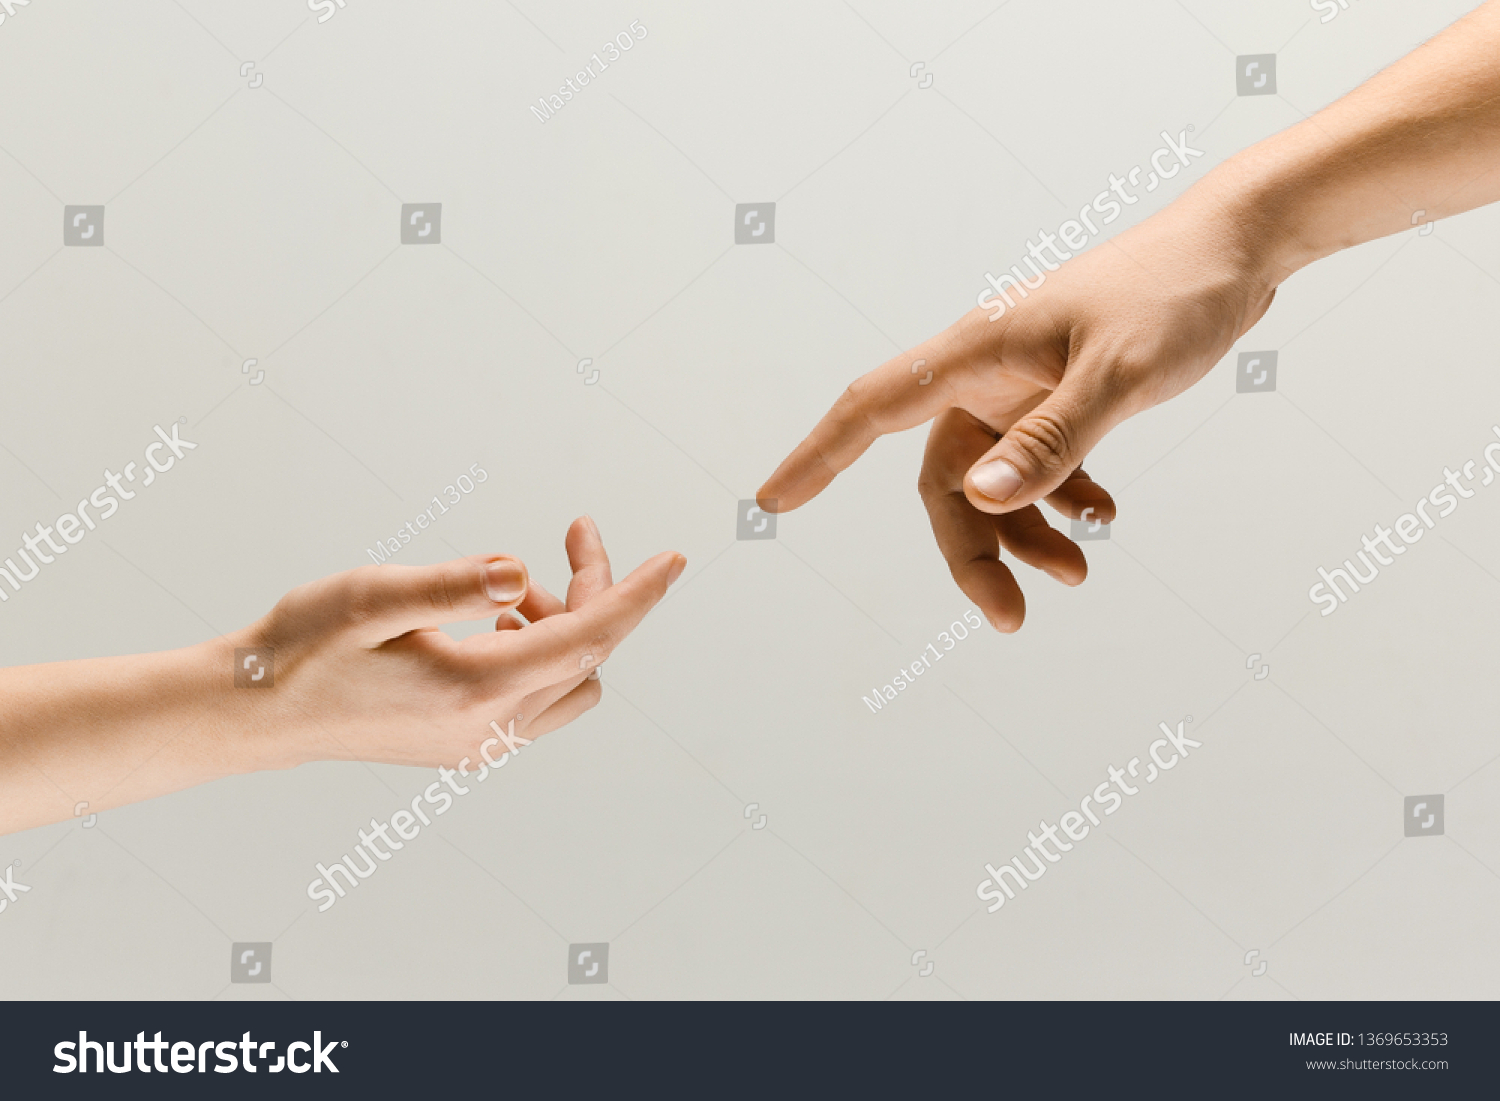 Moment of weightless. Two male hands trying to touch like a creation of Adam sign isolated on grey studio background. Concept of human relation, community, togetherness, symbolism, culture and history #1369653353